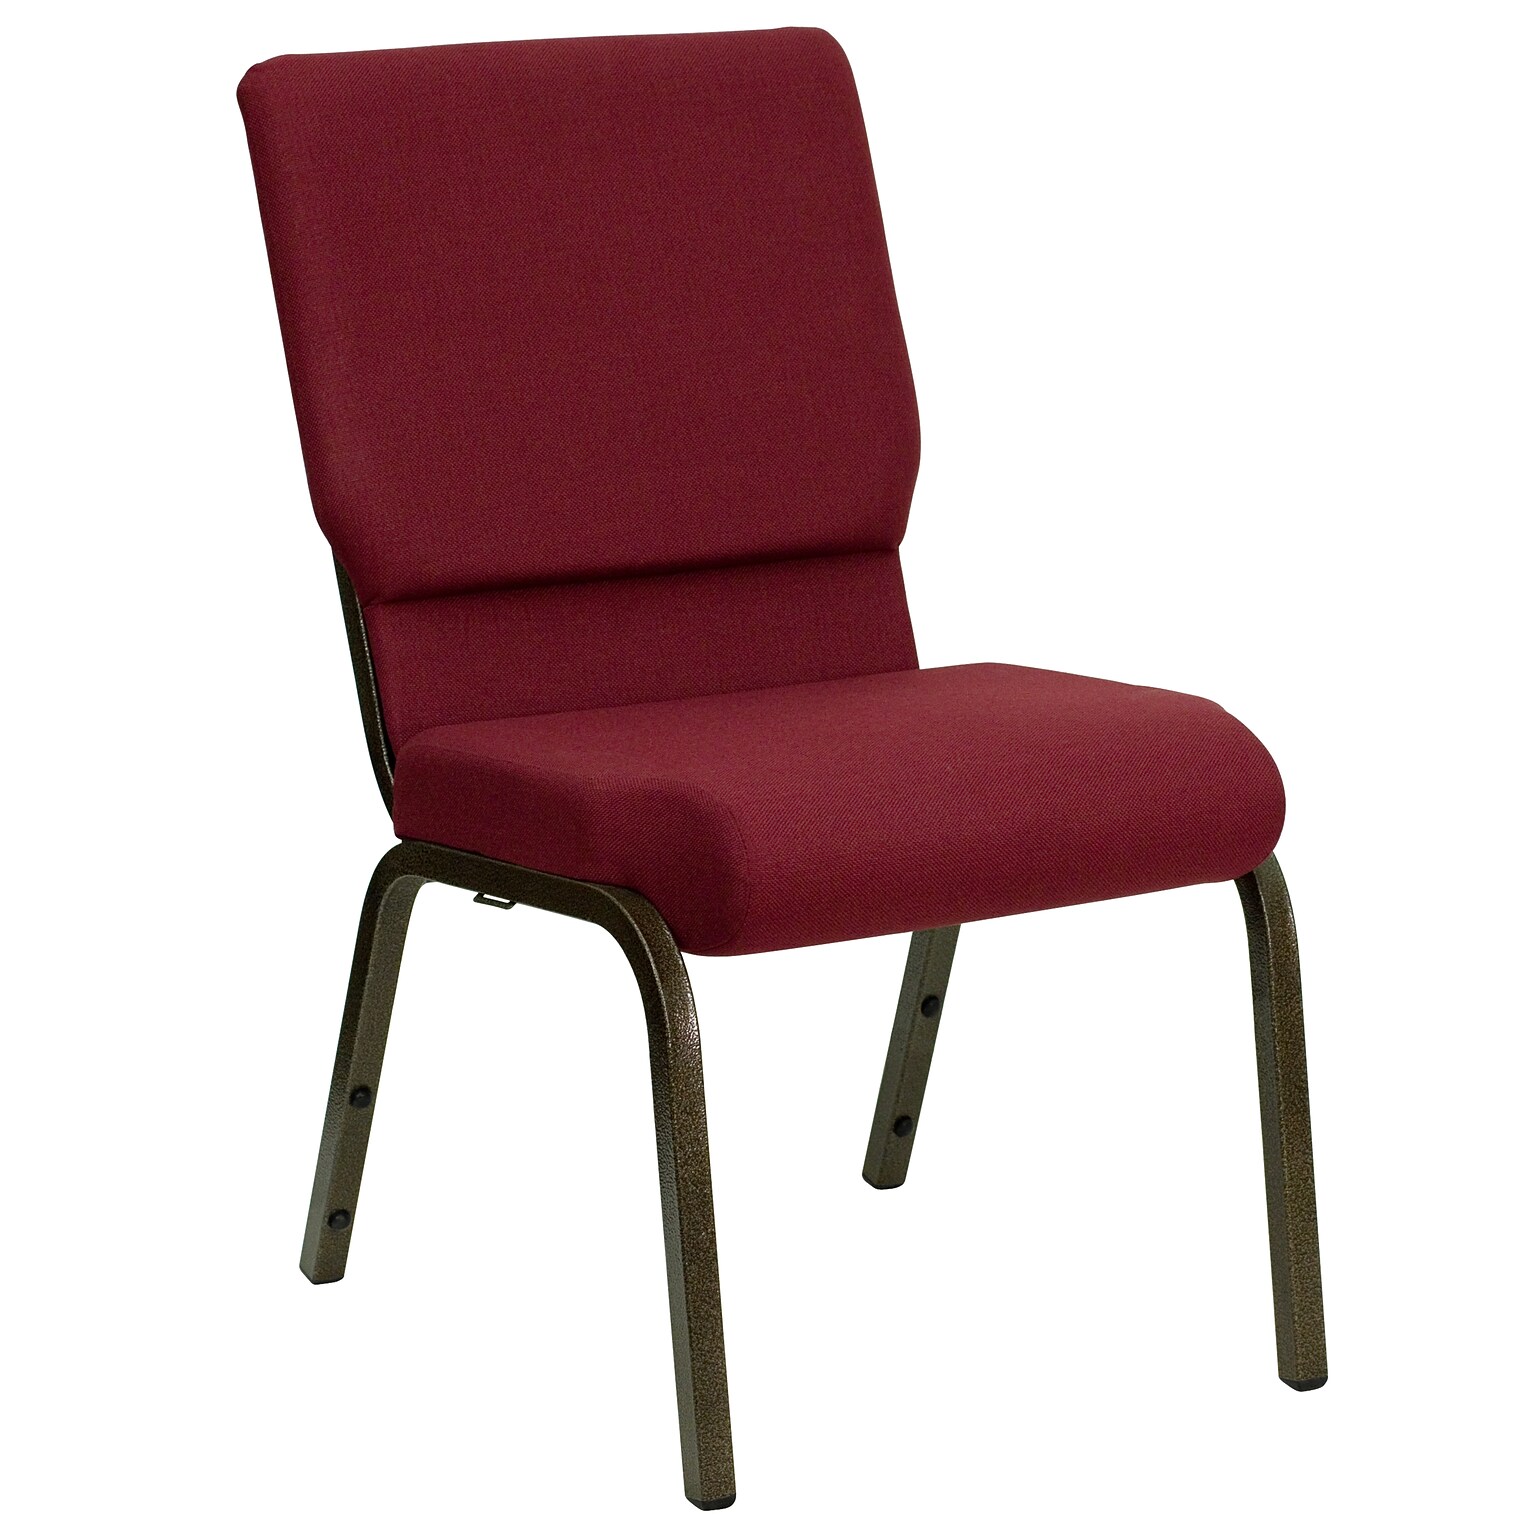 Flash Furniture HERCULES Series Fabric Stacking Church Chair, Burgundy/Gold Vein Frame (XCH60096BY)